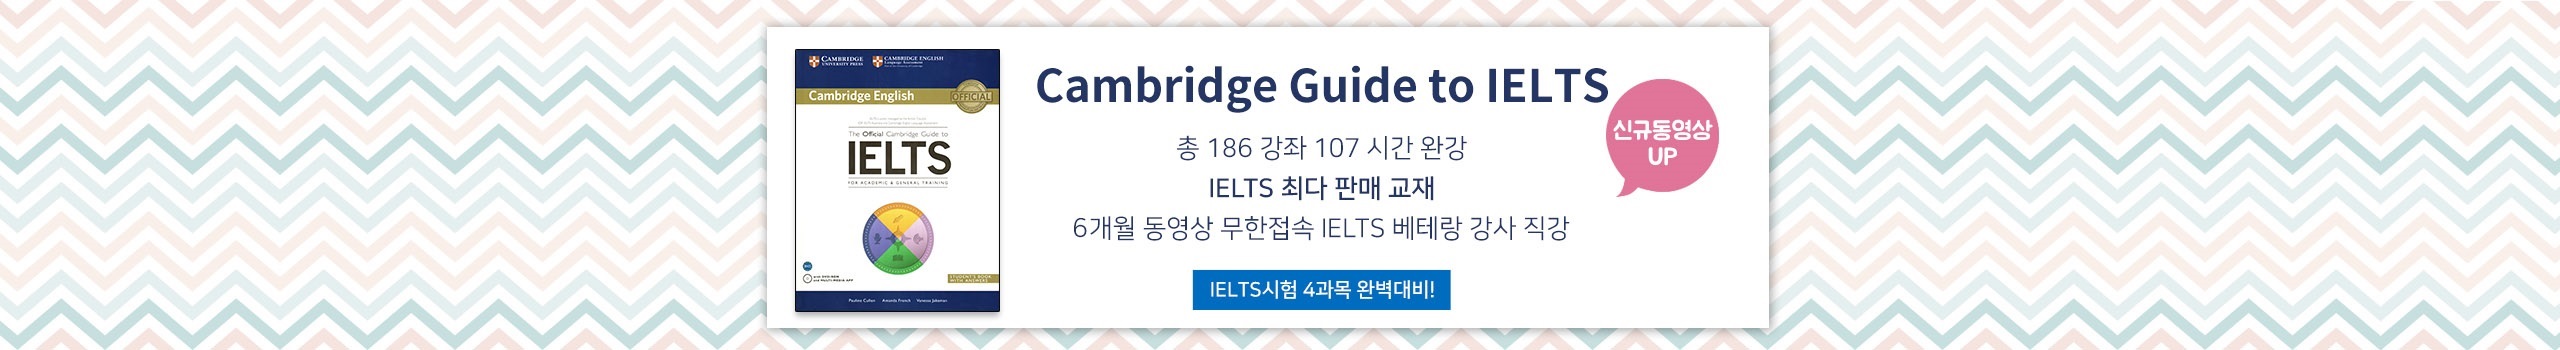 Guide to IELTS